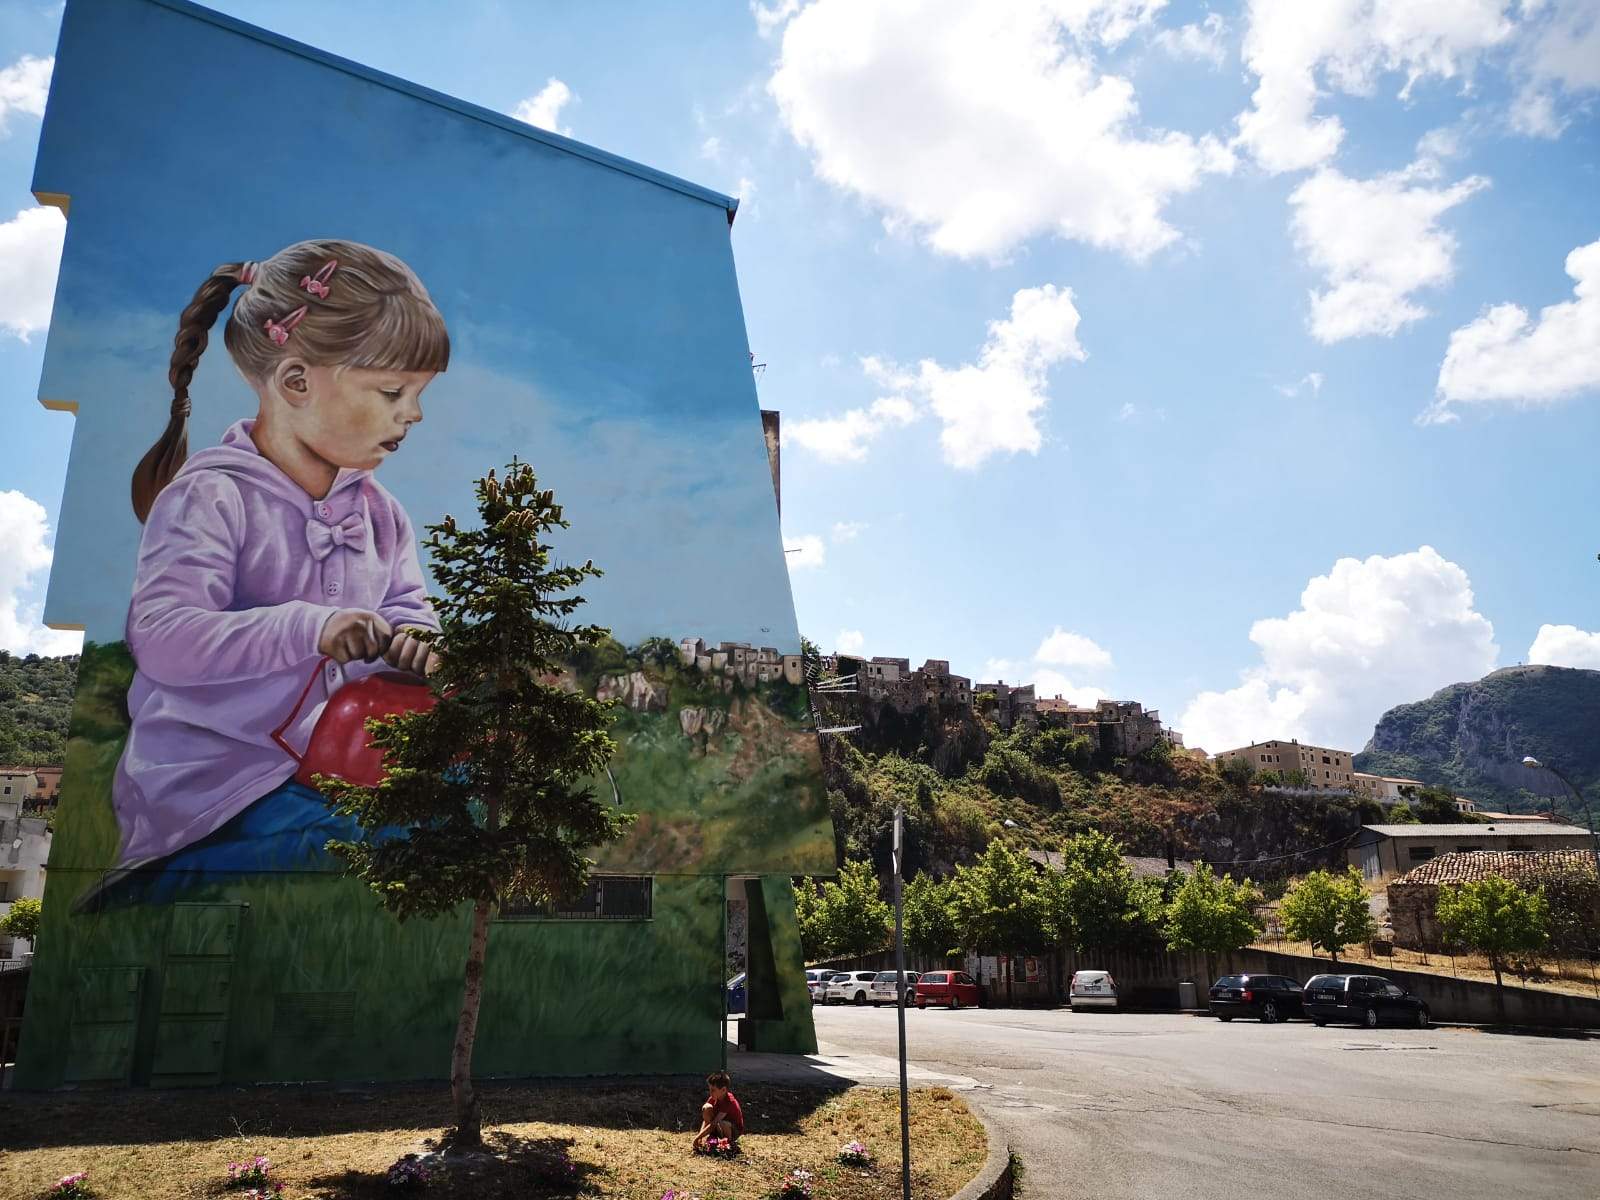 A spectacular mural that blends with the landscape has been created in Basilicata, Italy